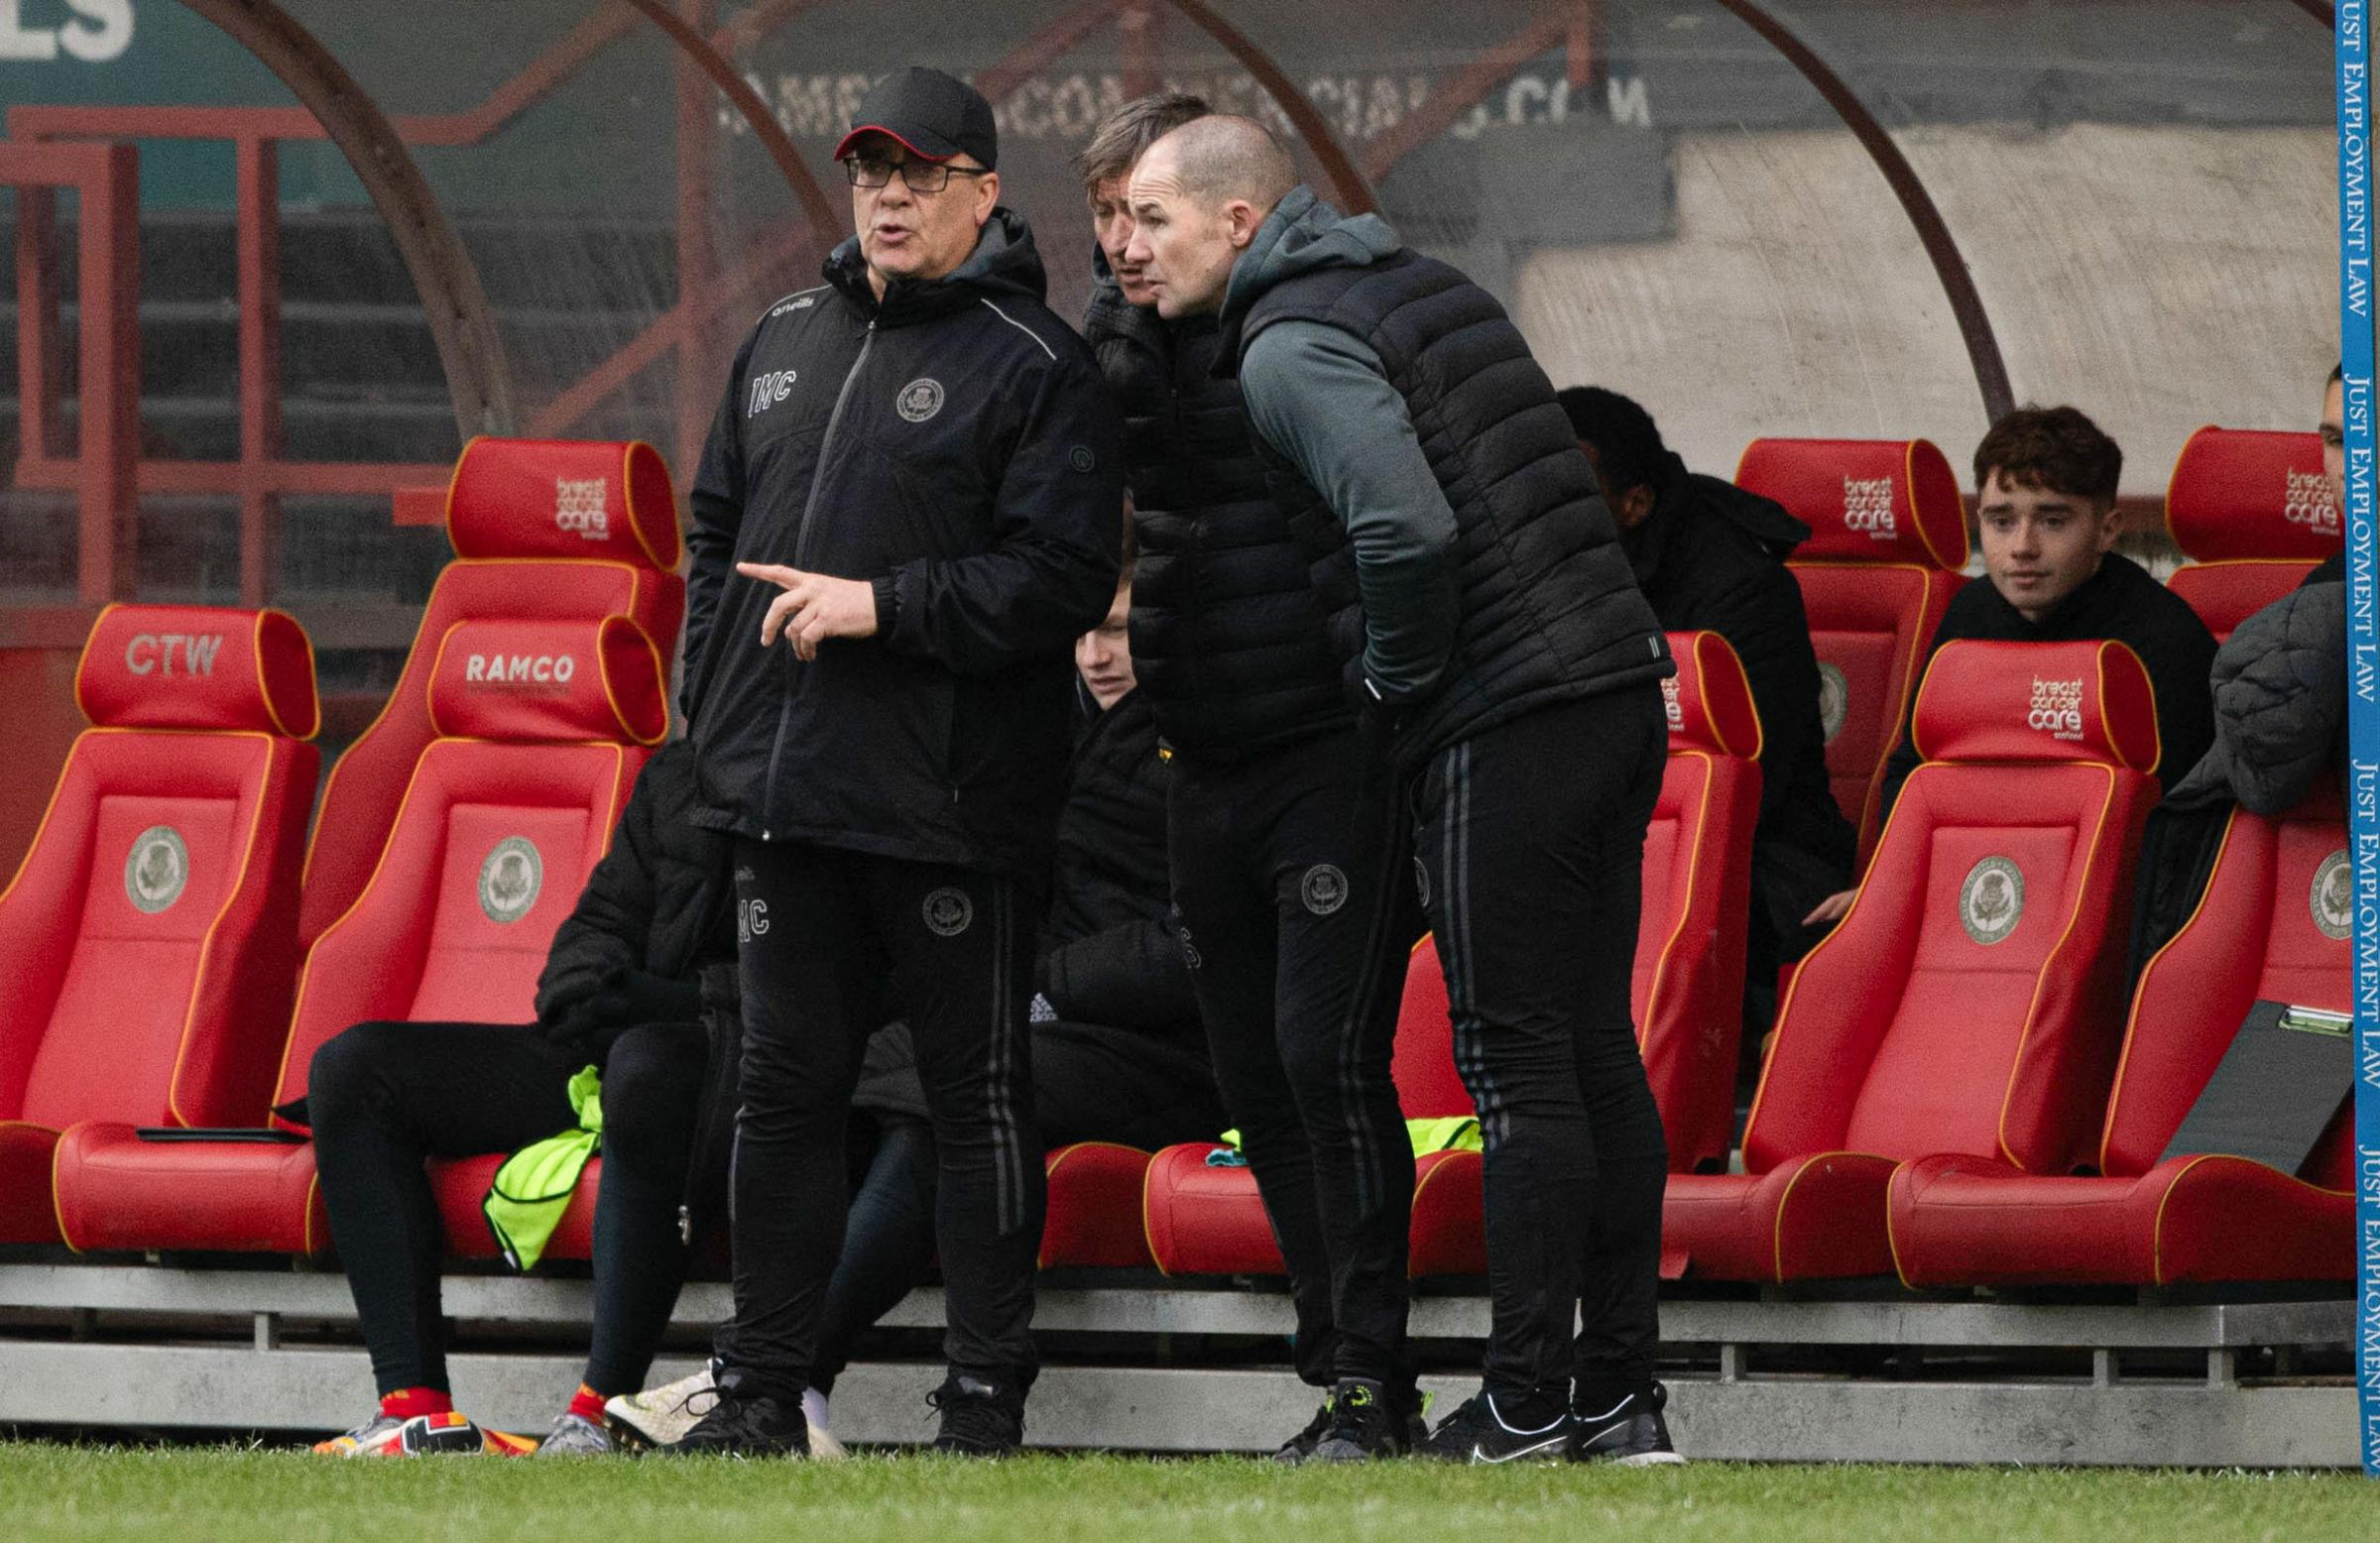 Ian McCall insists young Partick Thistle bench was 'one-off'